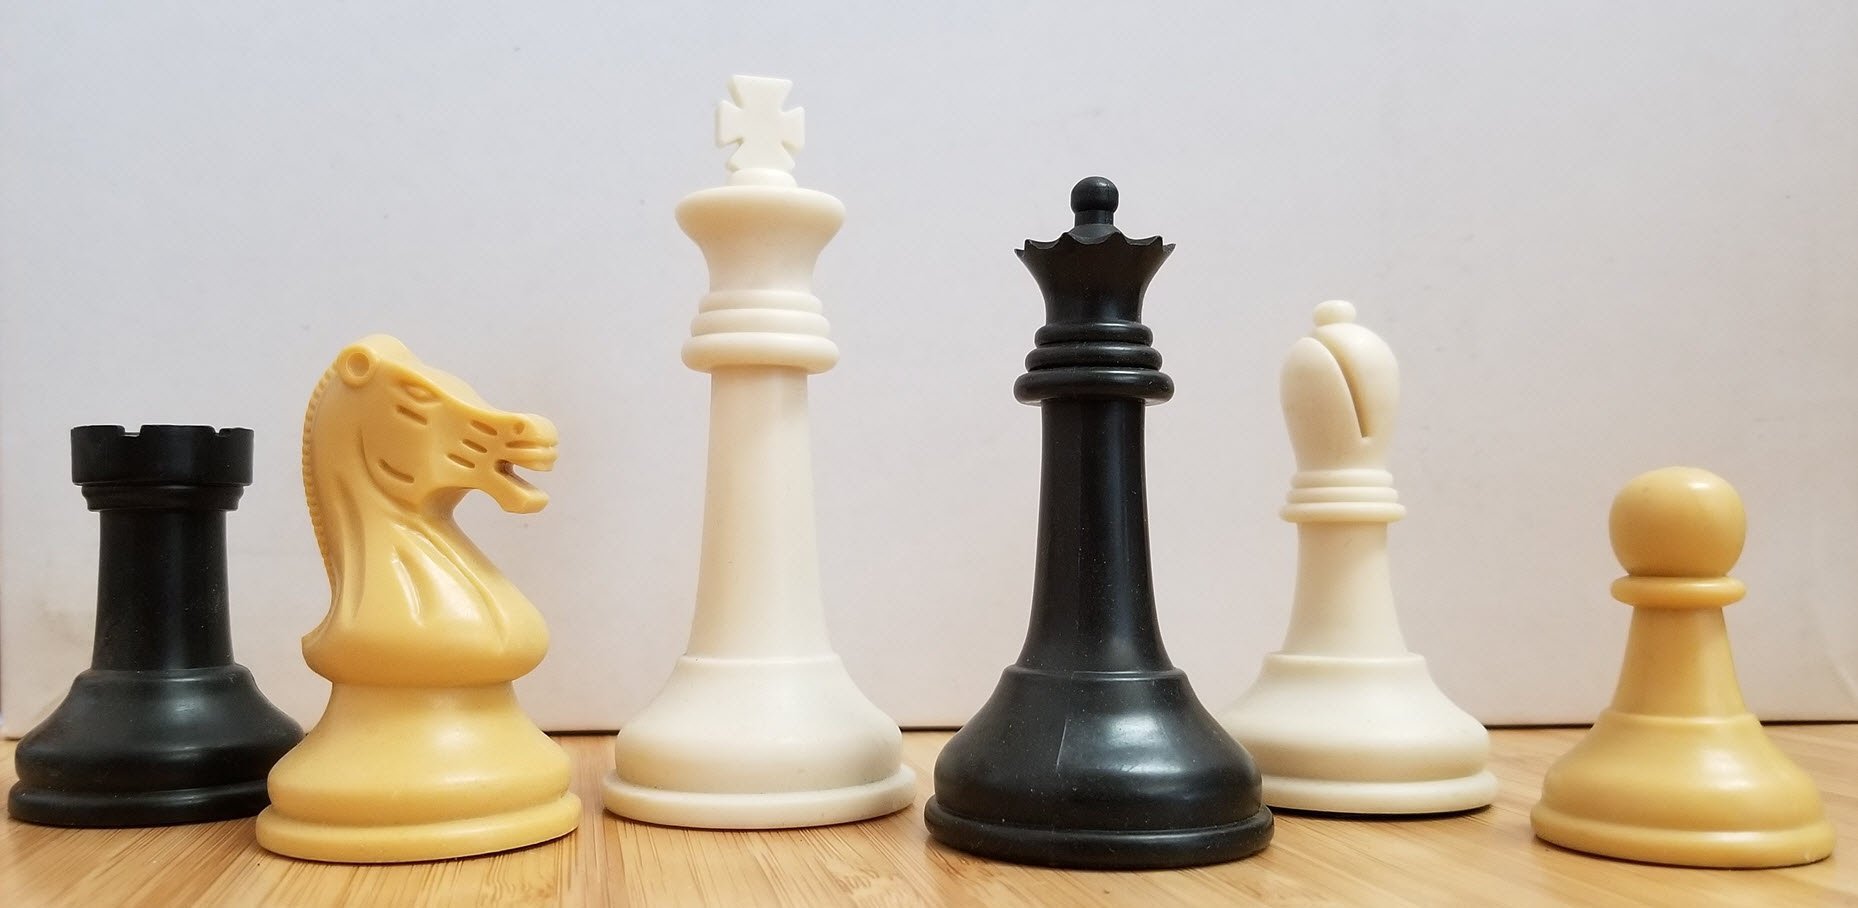 SINGLE REPLACEMENT PIECES: 3 7/8" Paladin Chess Pieces Piece